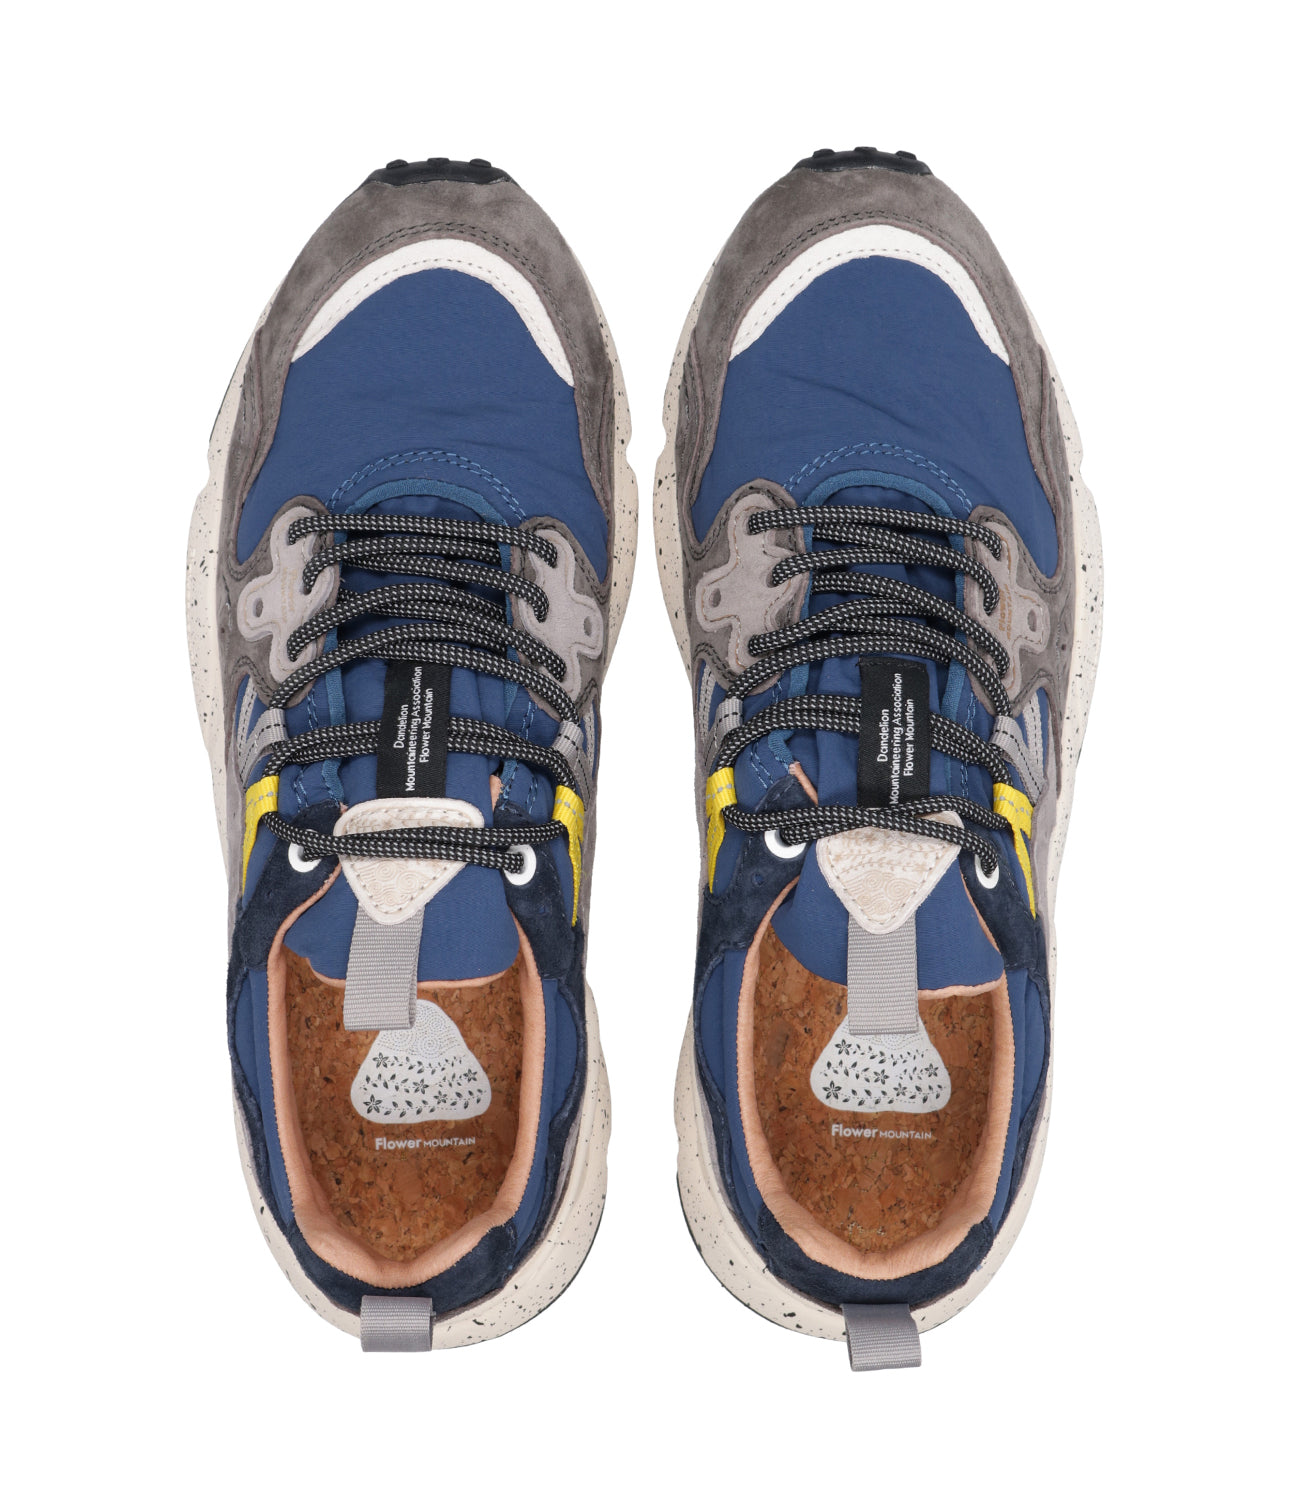 Flower Montain | Grey and Navy Blue Sneakers